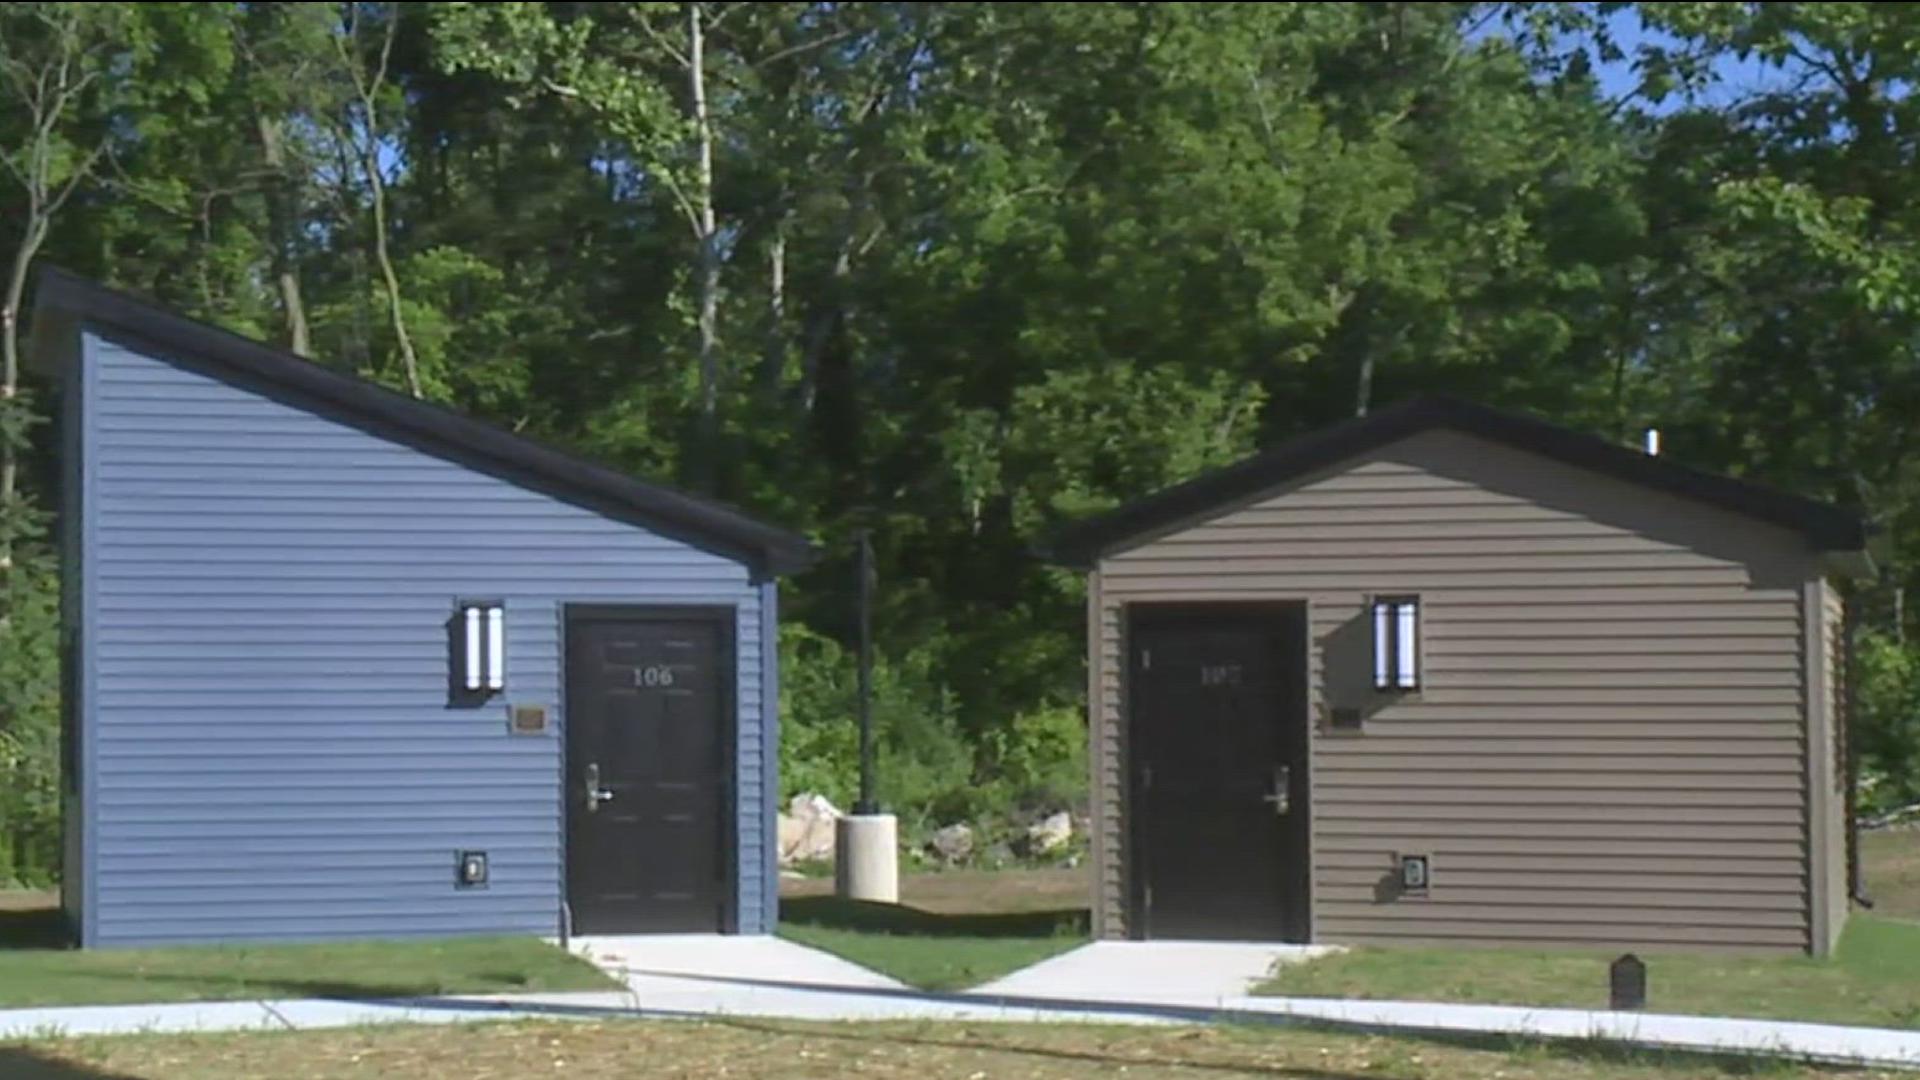 Veterans Outreach of Pennsylvania built 15 tiny homes in Harrisburg for veterans experiencing homelessness.